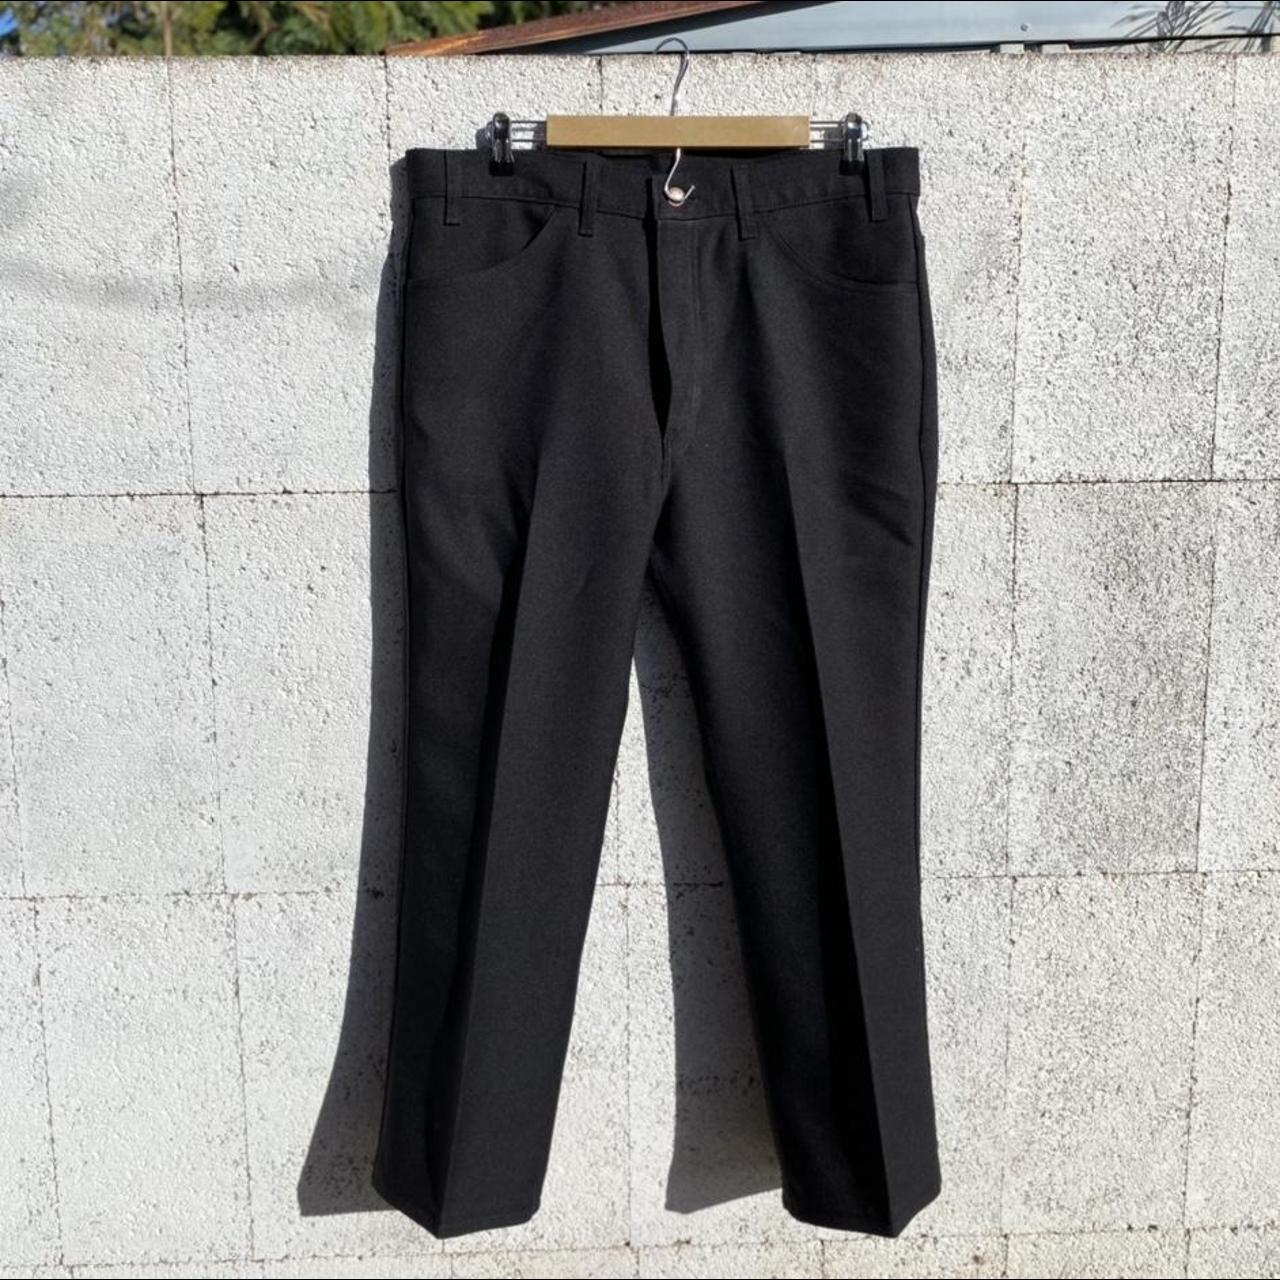 ⚡️VINTAGE 70s CHICANO PANTS BY LEVI’S⚡️ Vintage made... - Depop